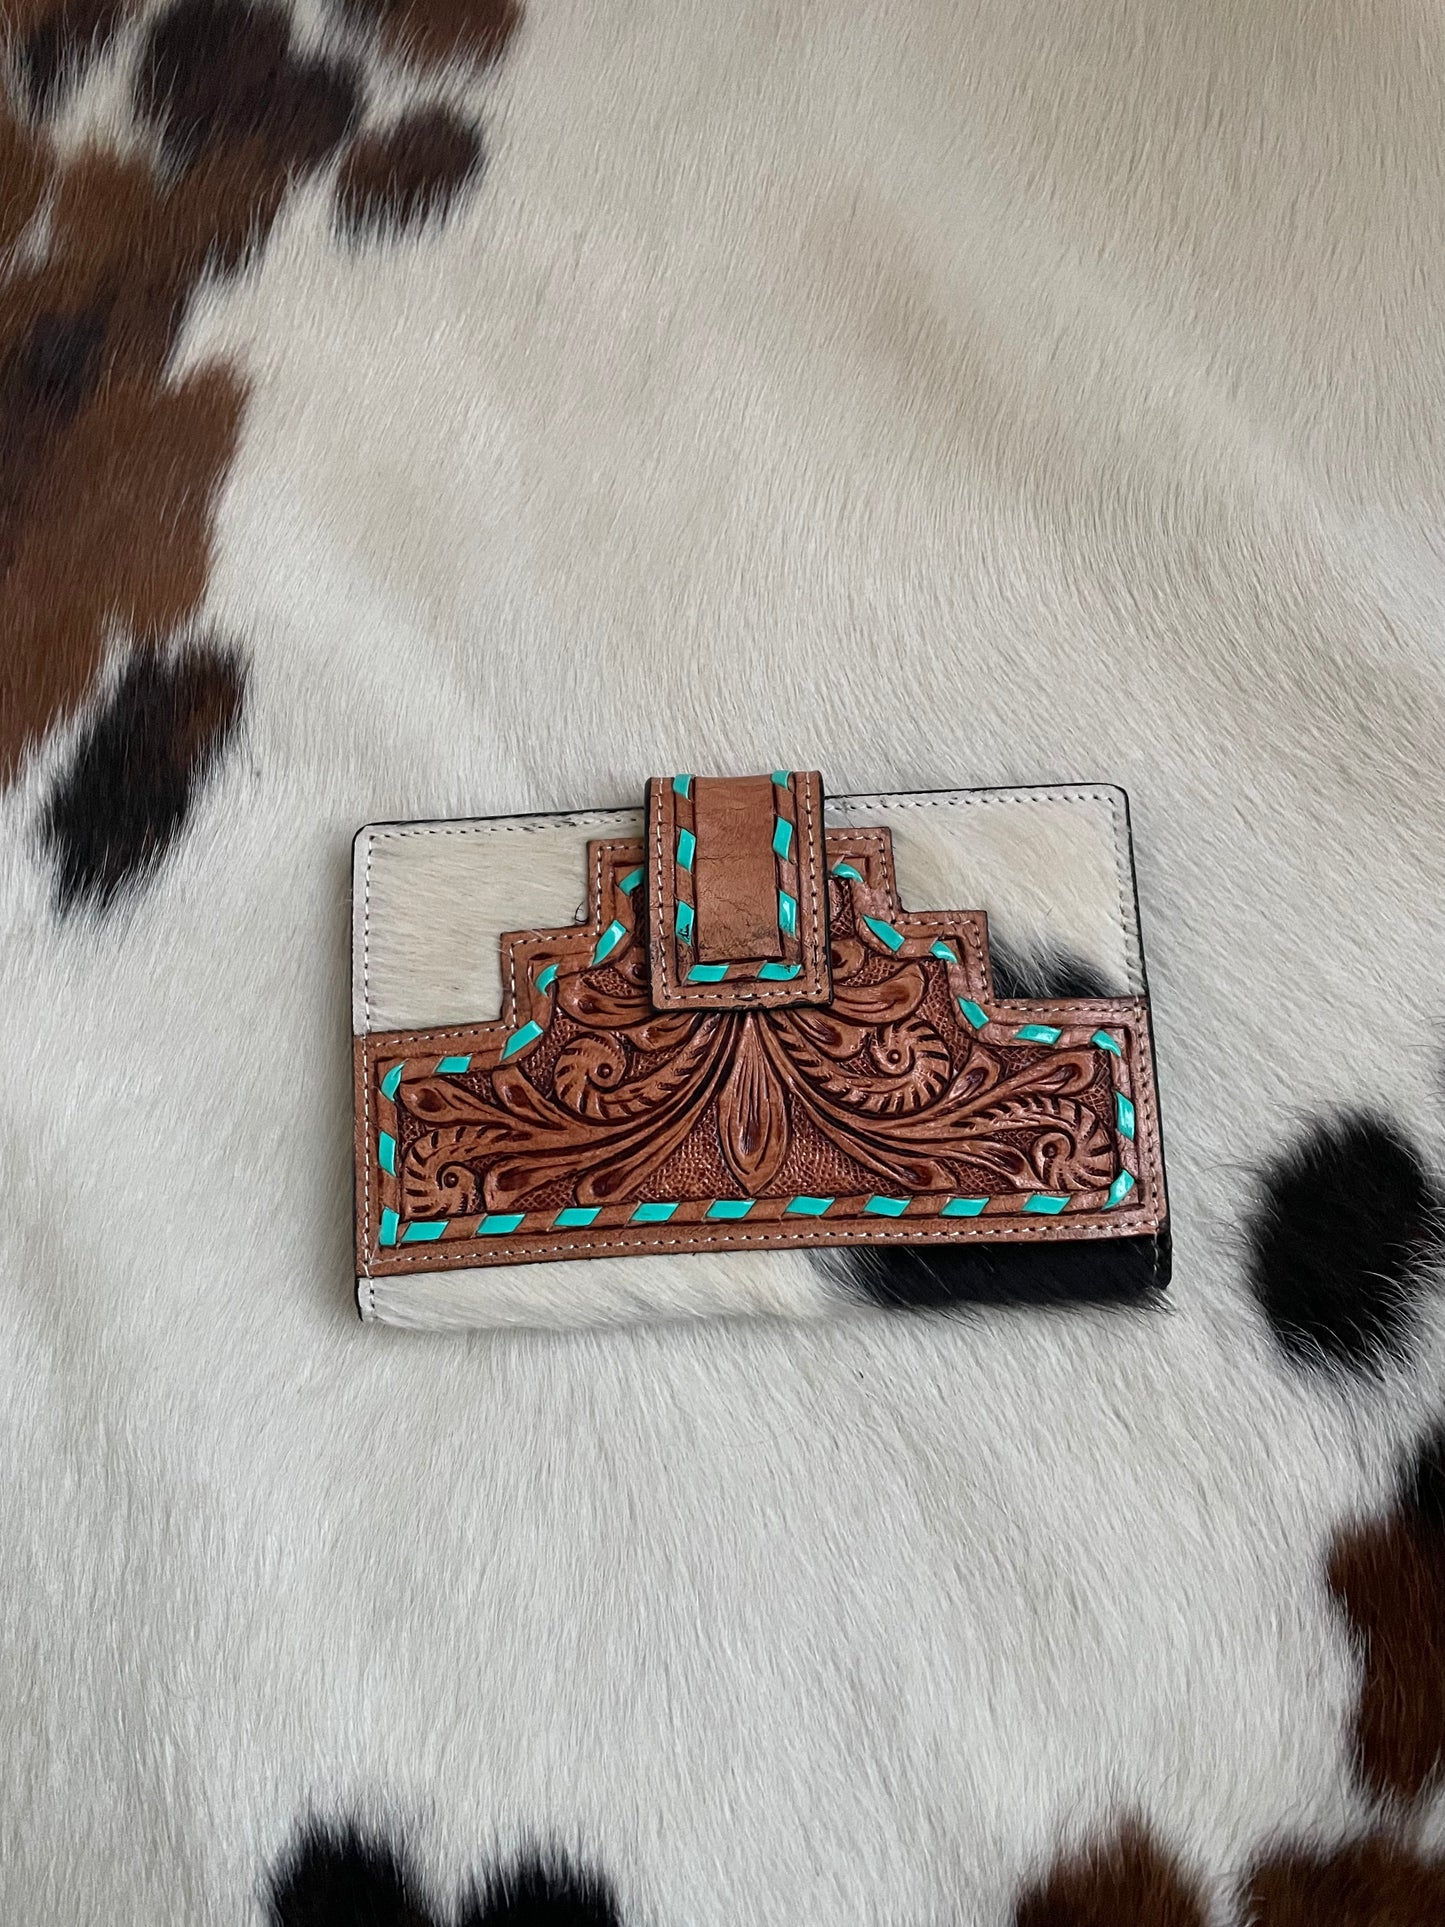 Turquoise Tooled Leather Cowhide Purse